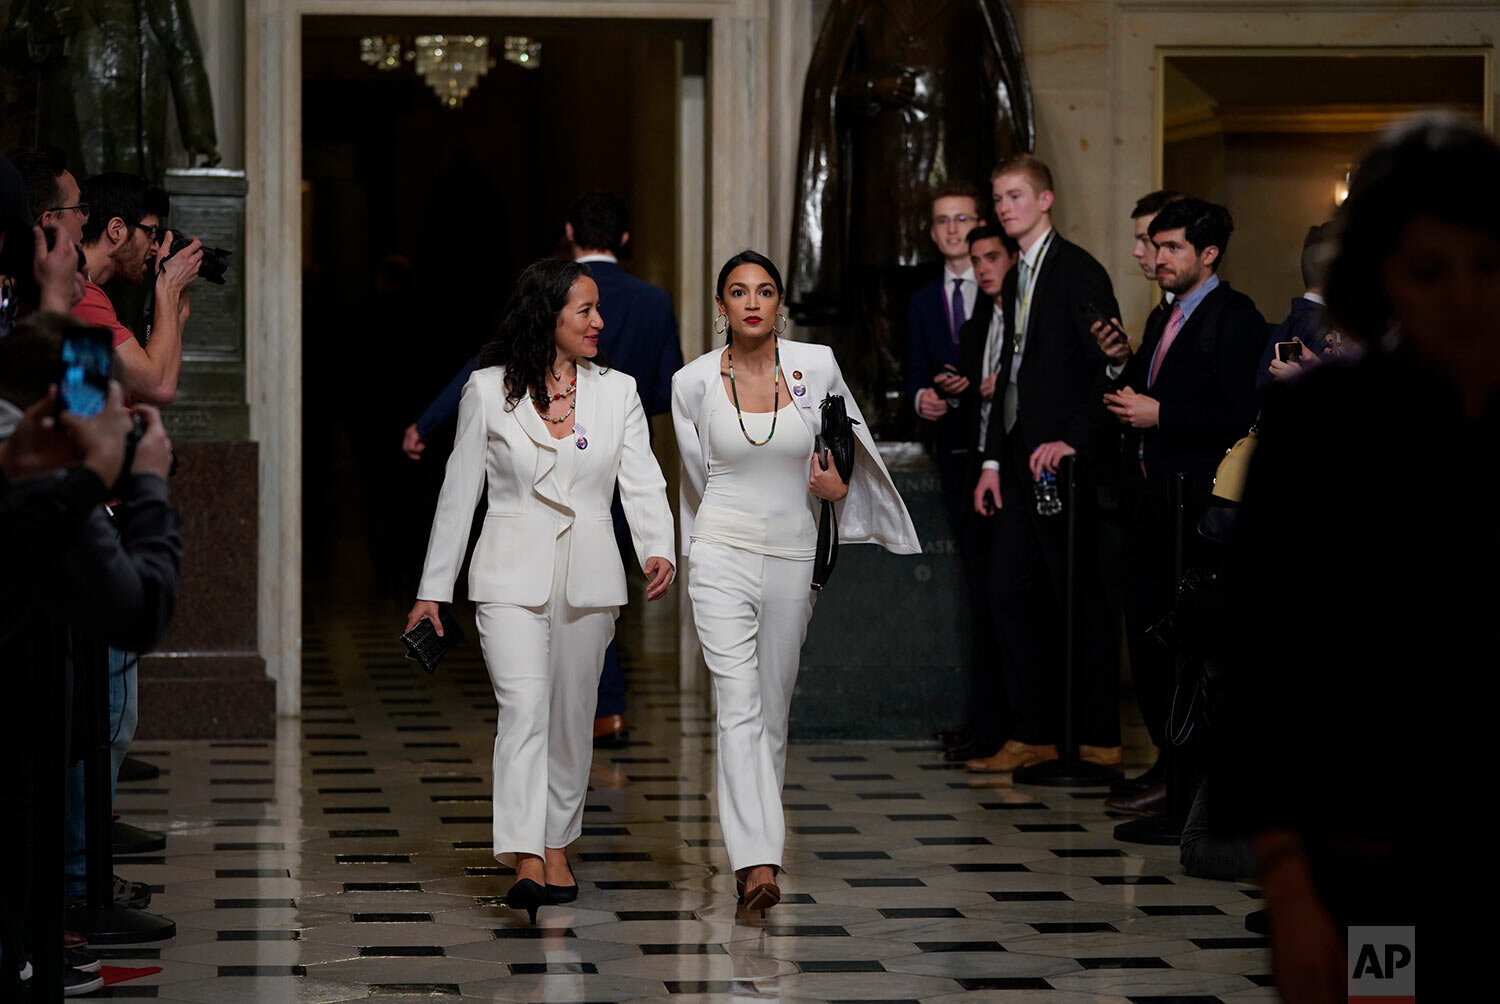  Rep. Alexandria Ocasio-Cortez, D-N.Y., right arrives with her guest, Ana Maria Archila of New York, to hear President Donald Trump deliver his State of the Union address to a joint session of Congress on Capitol Hill in Washington on Feb. 5, 2019. (